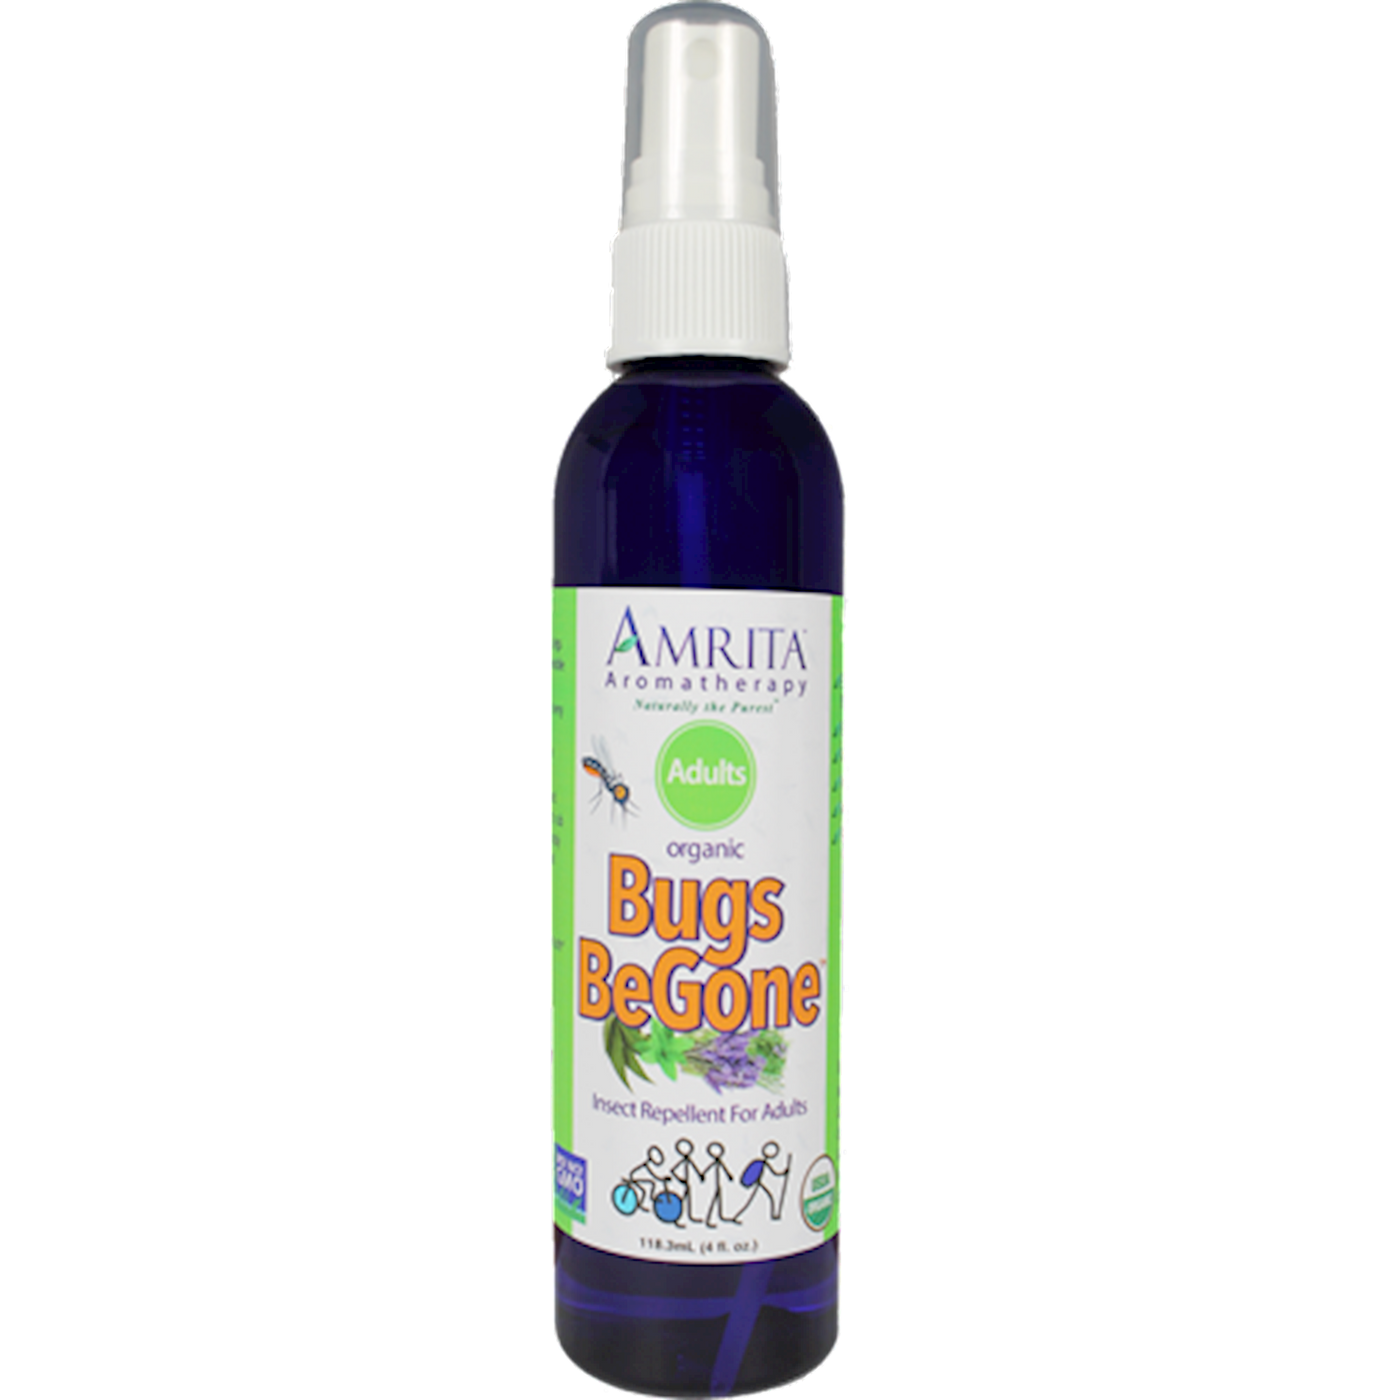 Adult Organic Bugs Be Gone 4 fl oz Curated Wellness